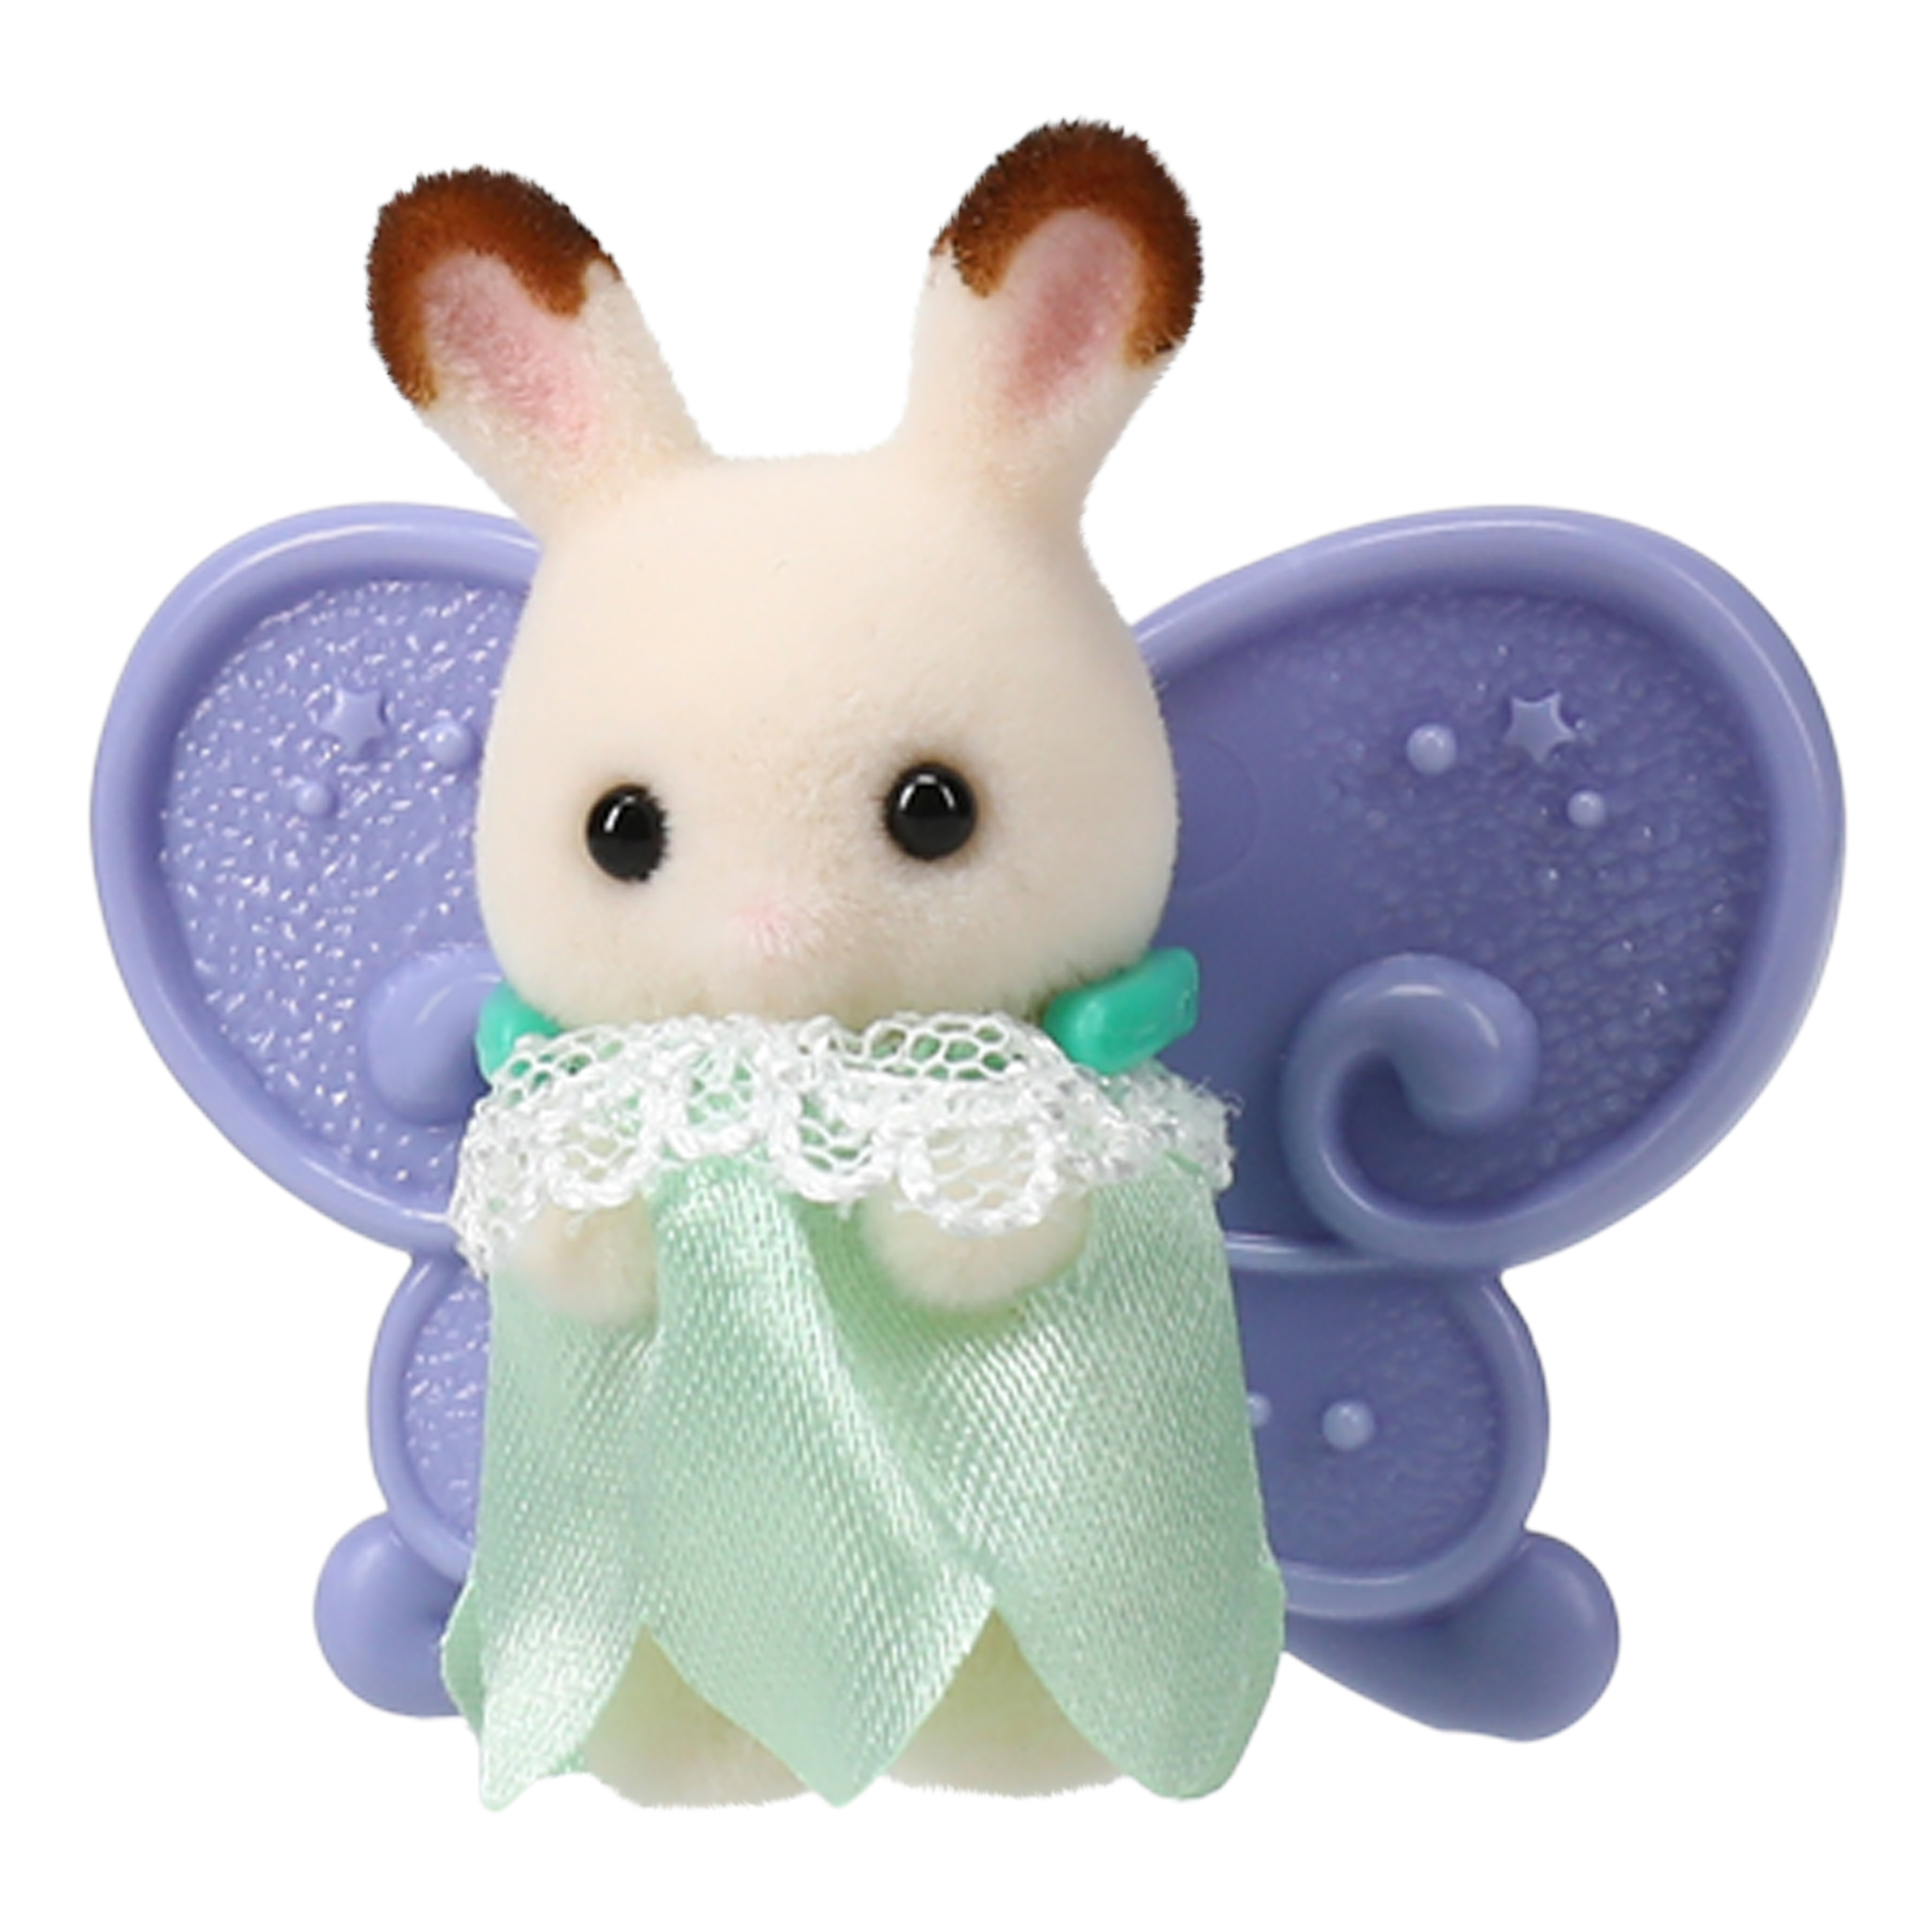 Calico Critters® Baby Fairytale Series Blind Bag